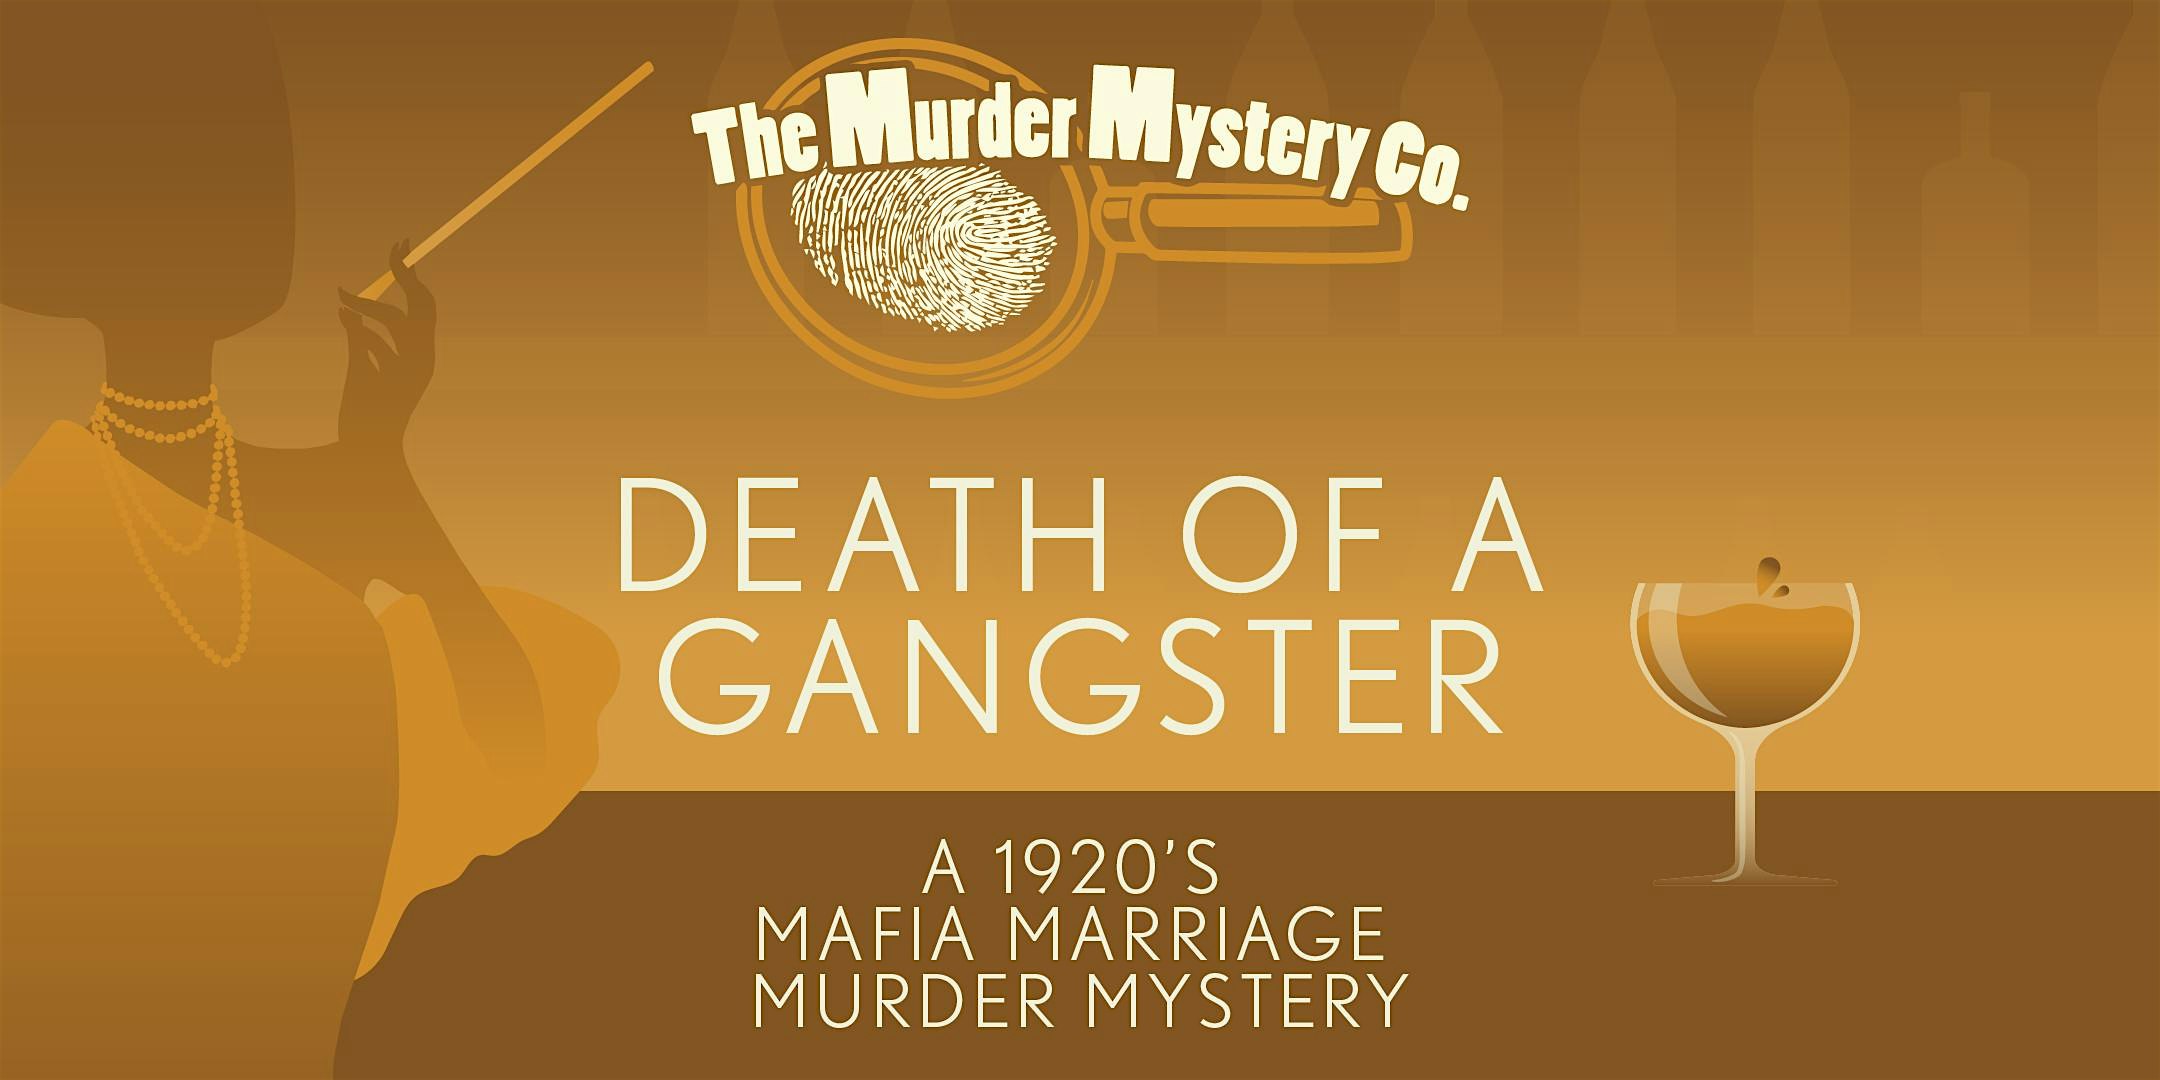 Murder Mystery Dinner Theater Show in Minneapolis: Death of a Gangster